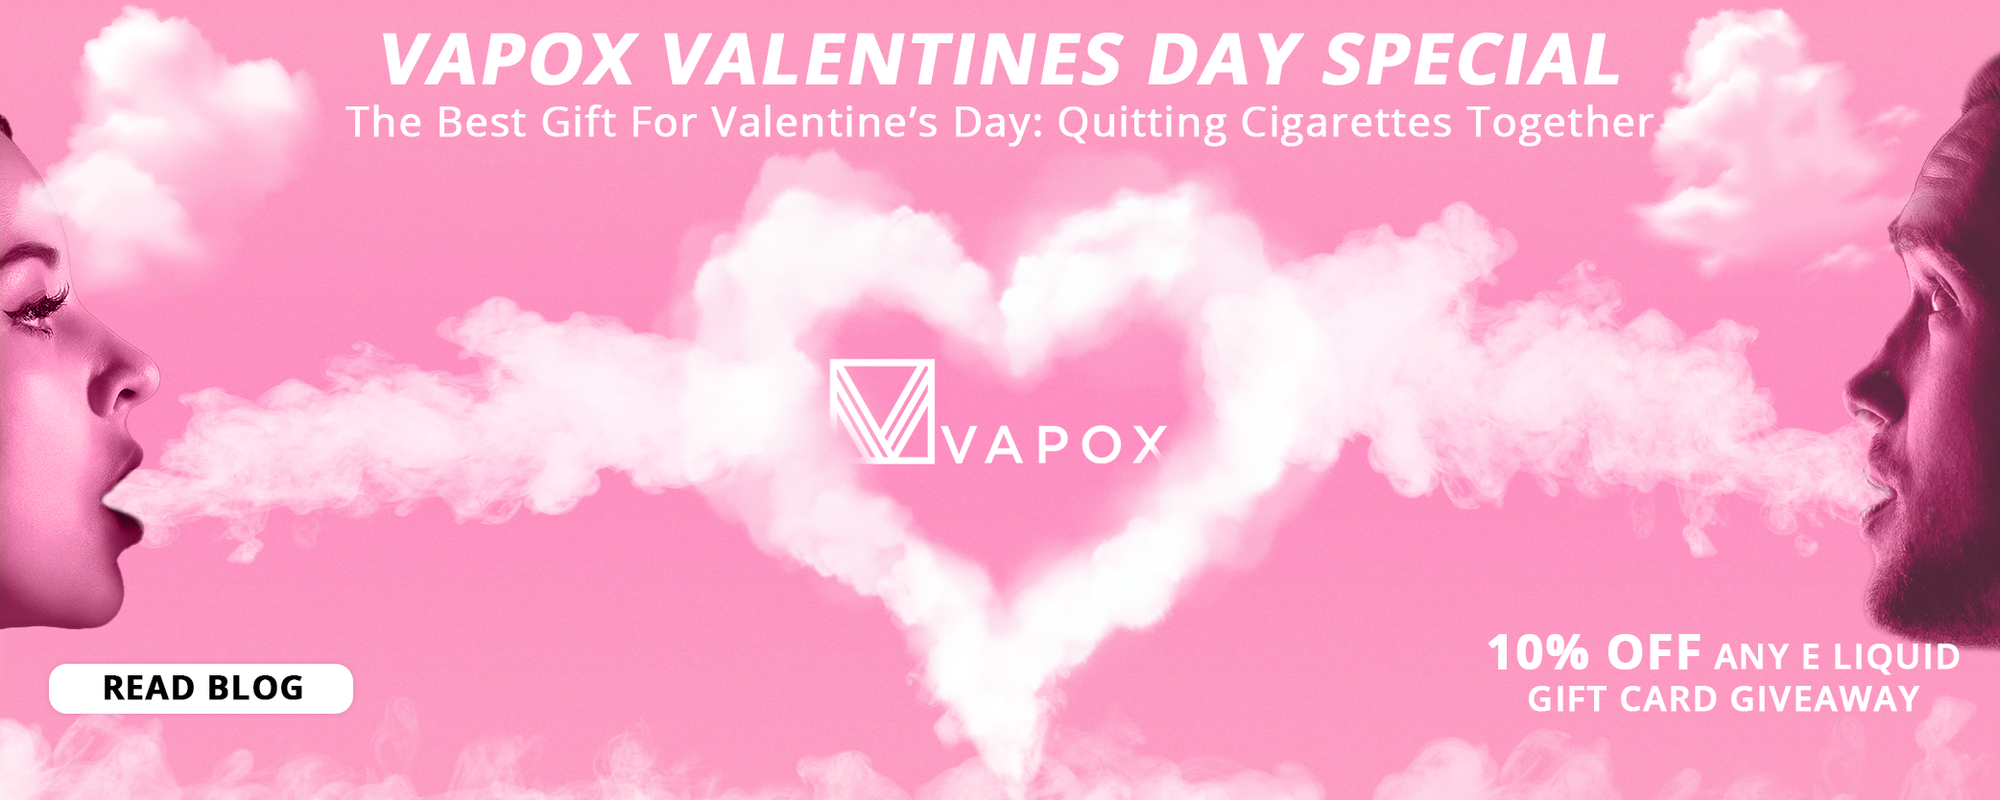 The Best Gift for Valentine’s Day: Quitting Cigarettes Together